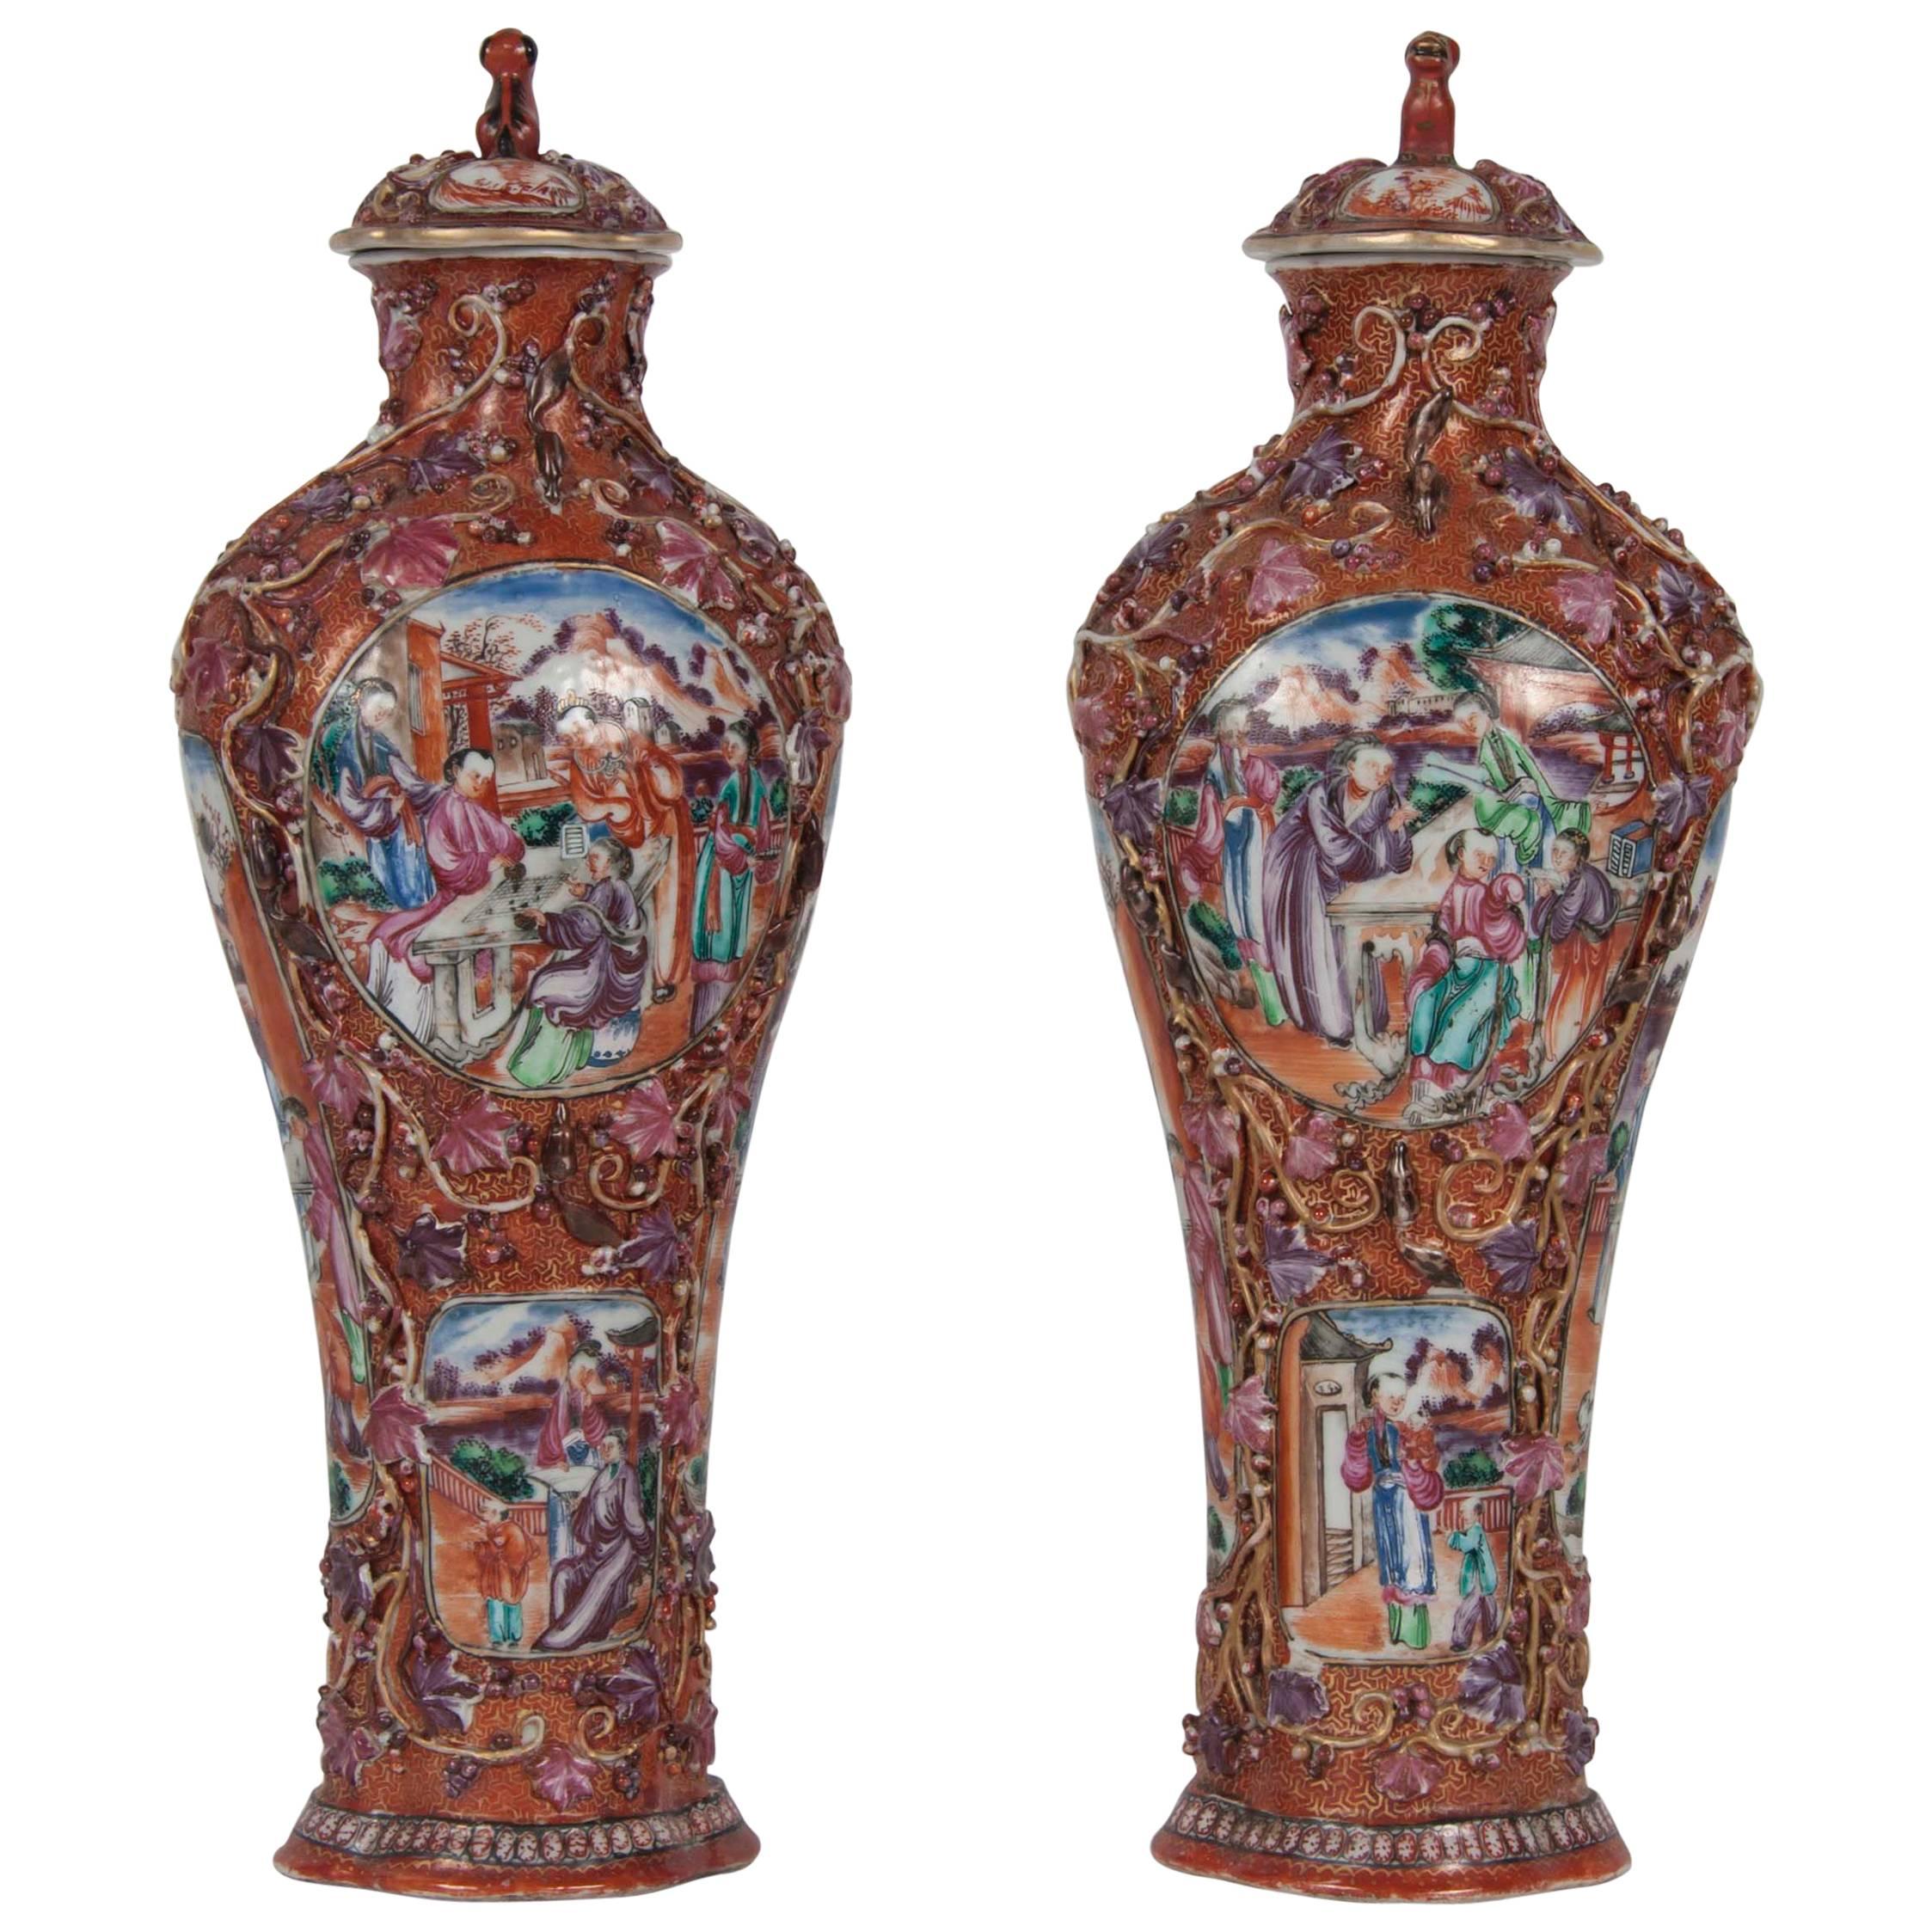 Fabulous Pair of 18th Century Chinese Covered Urns For Sale